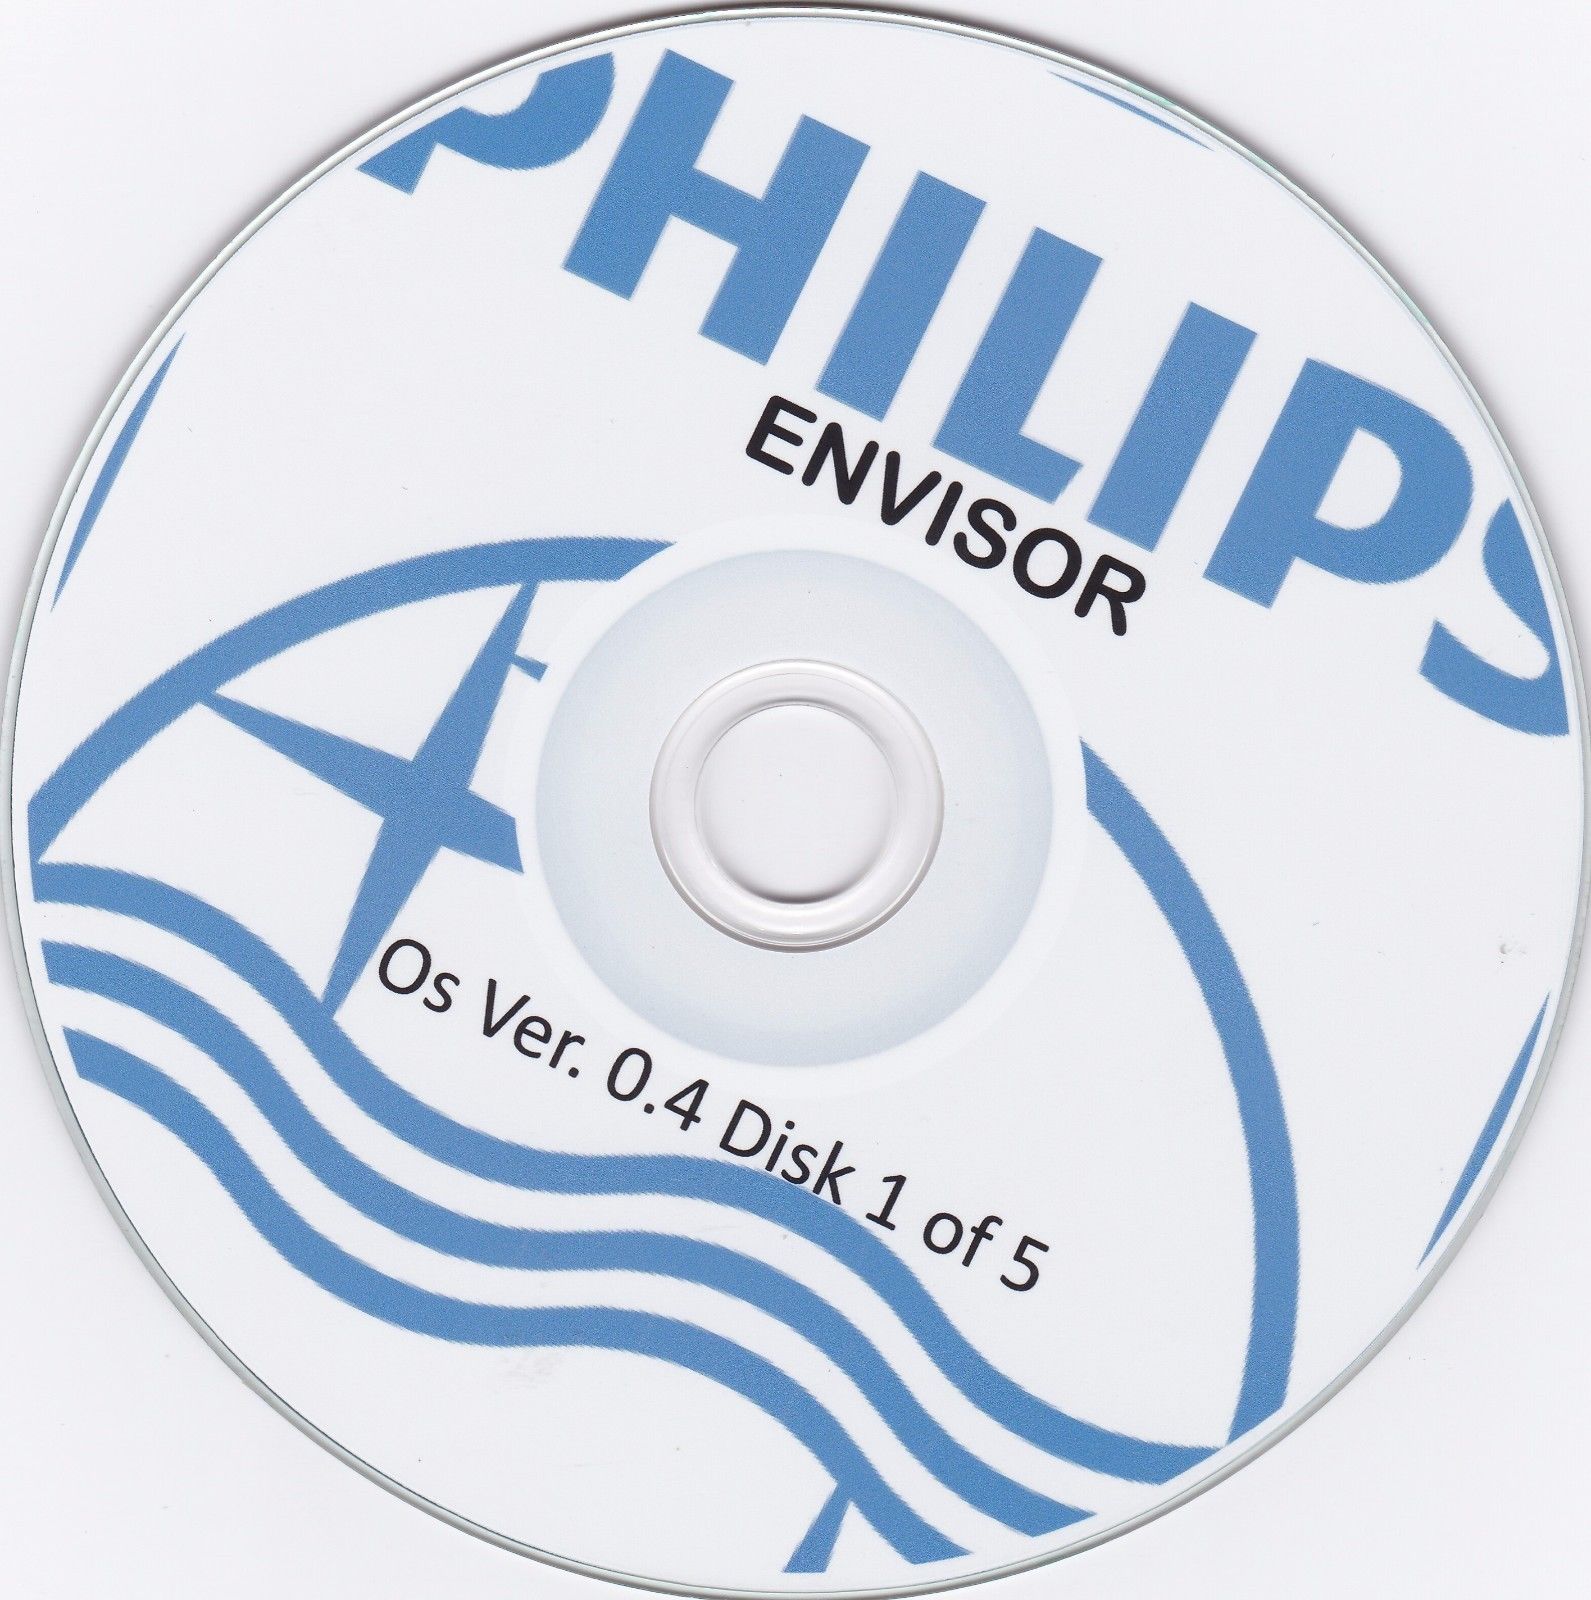 philips software disk 2